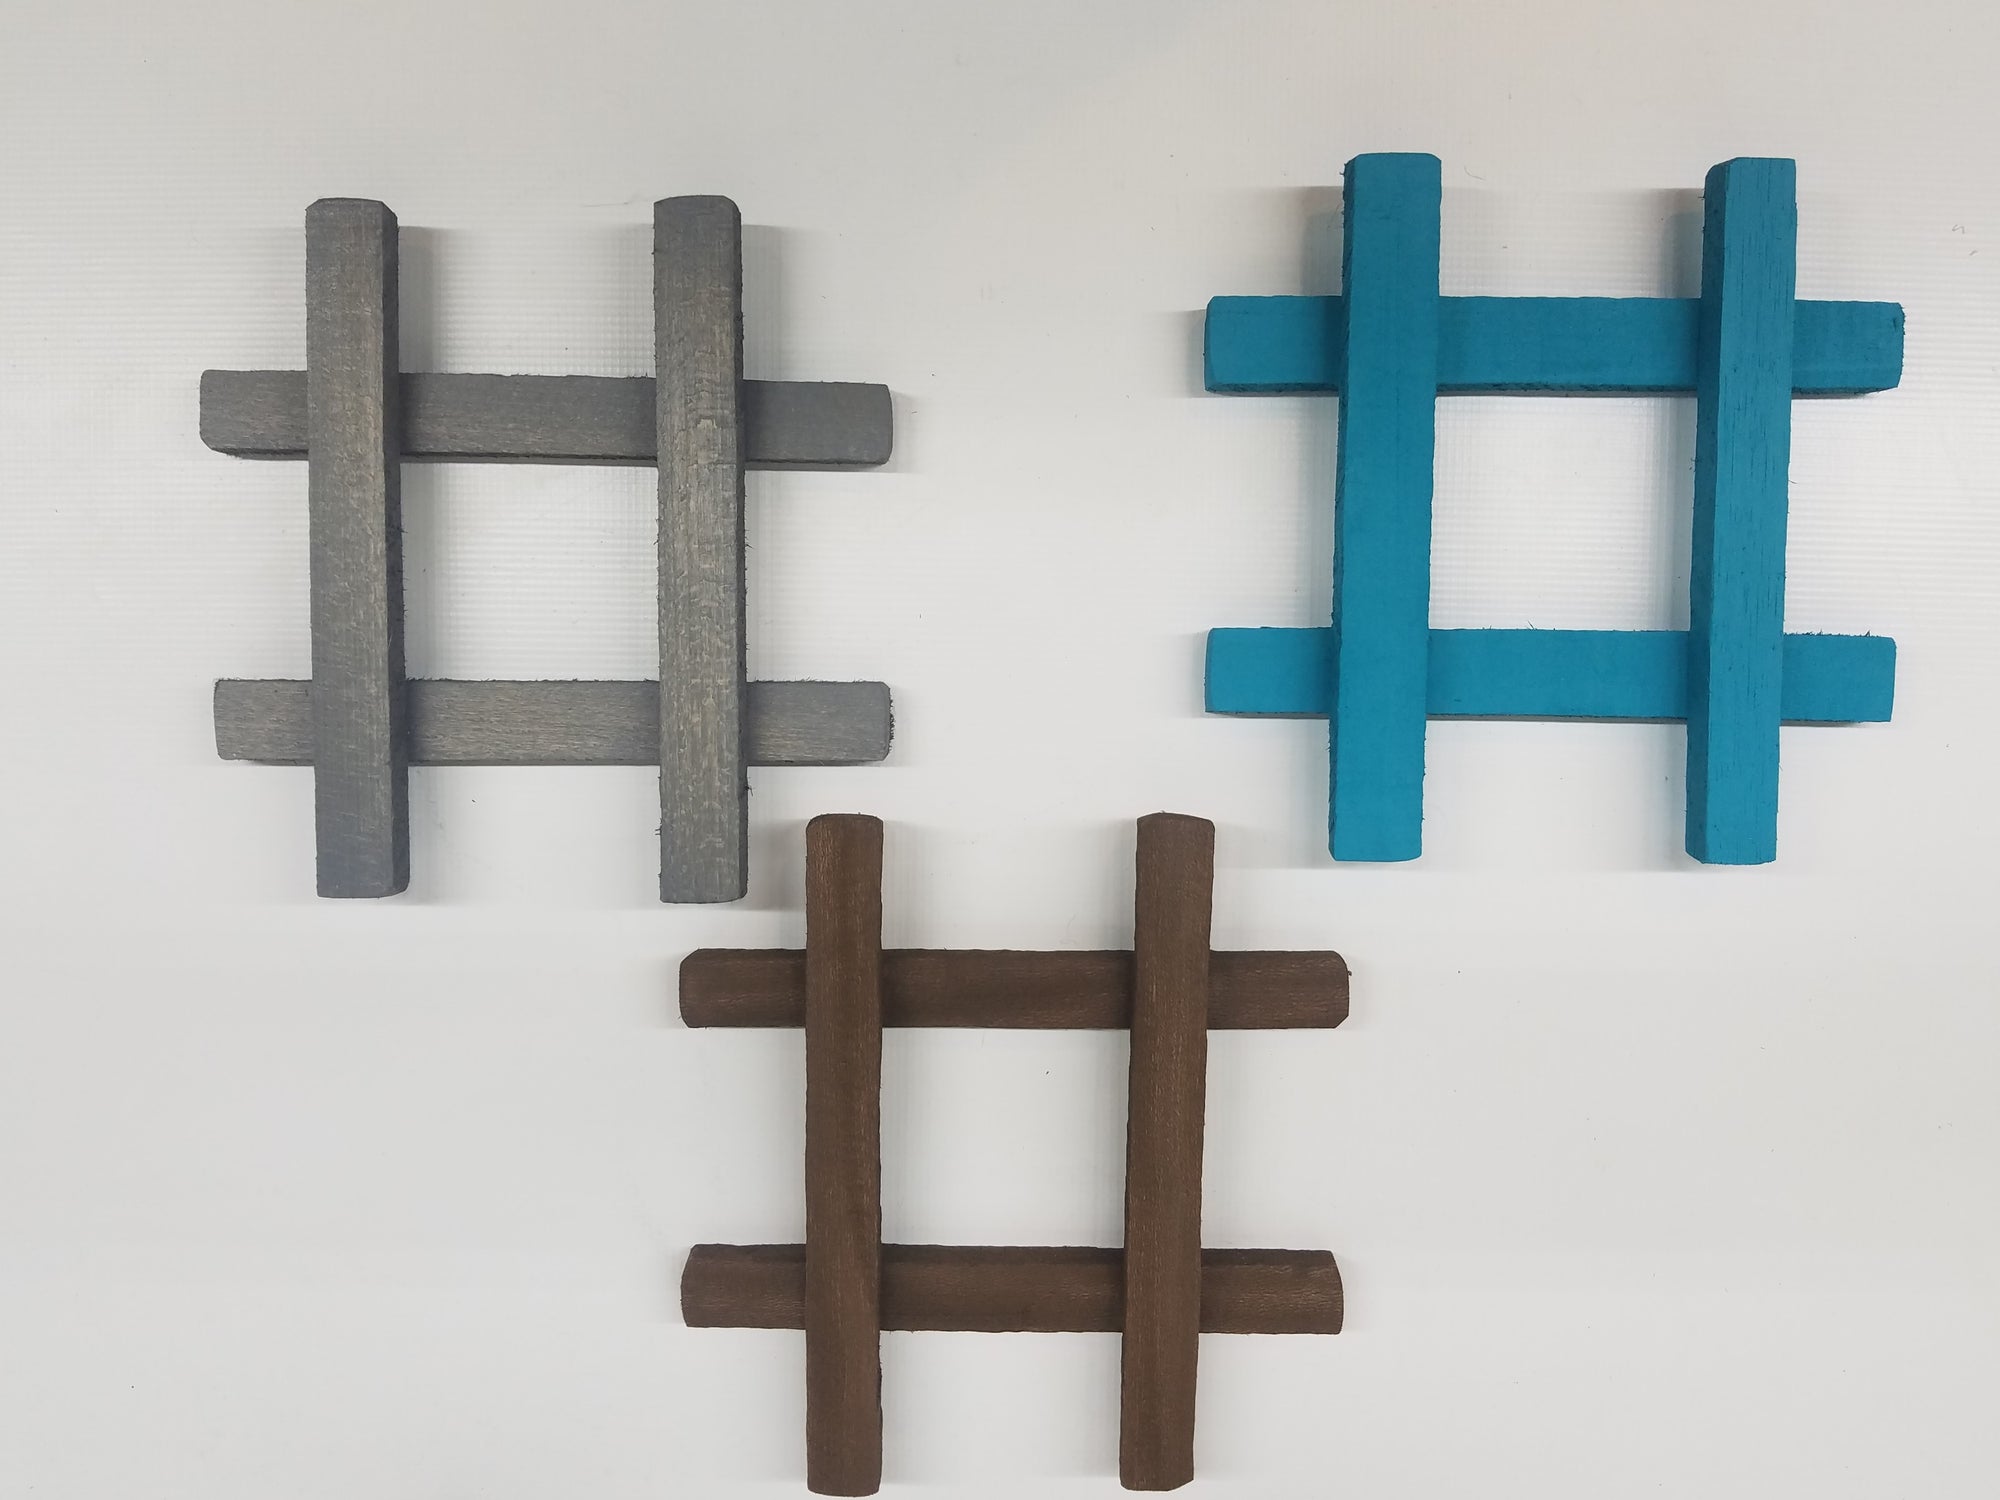 Hashtag Wall Hanging- Wall Art- #- Choose Your Color- Choose Your Size- Modern- Hip- IKR- Cool- Room Decor- Game Room- Den- Kids Room- Sign